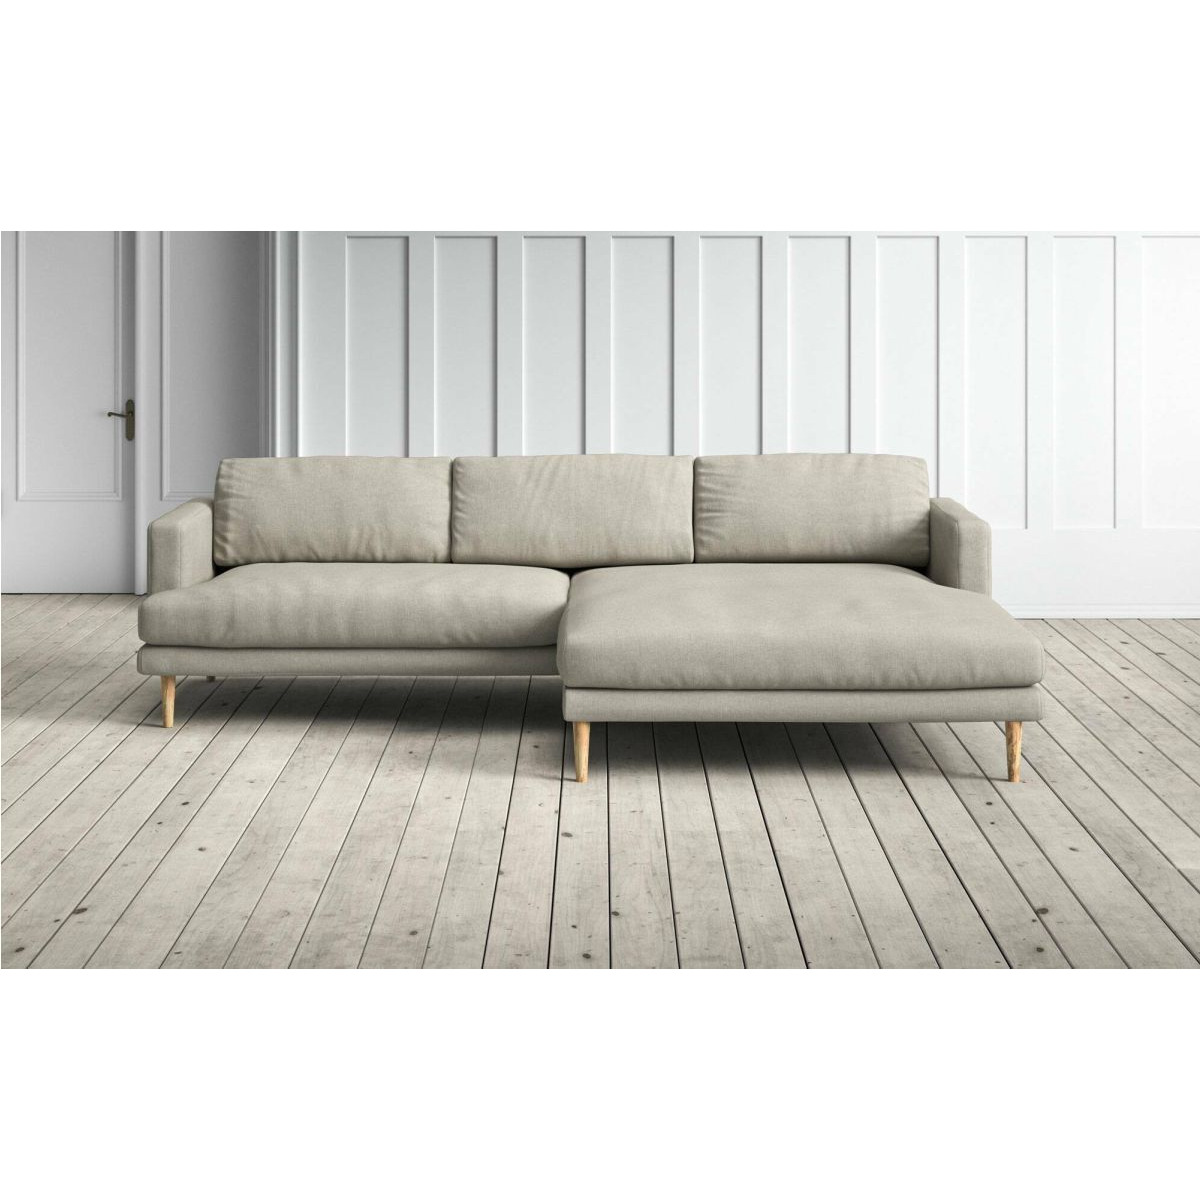 Graham and Green Sydney 4 Seater Right Chaise Sofa in Flax Belgian Linen